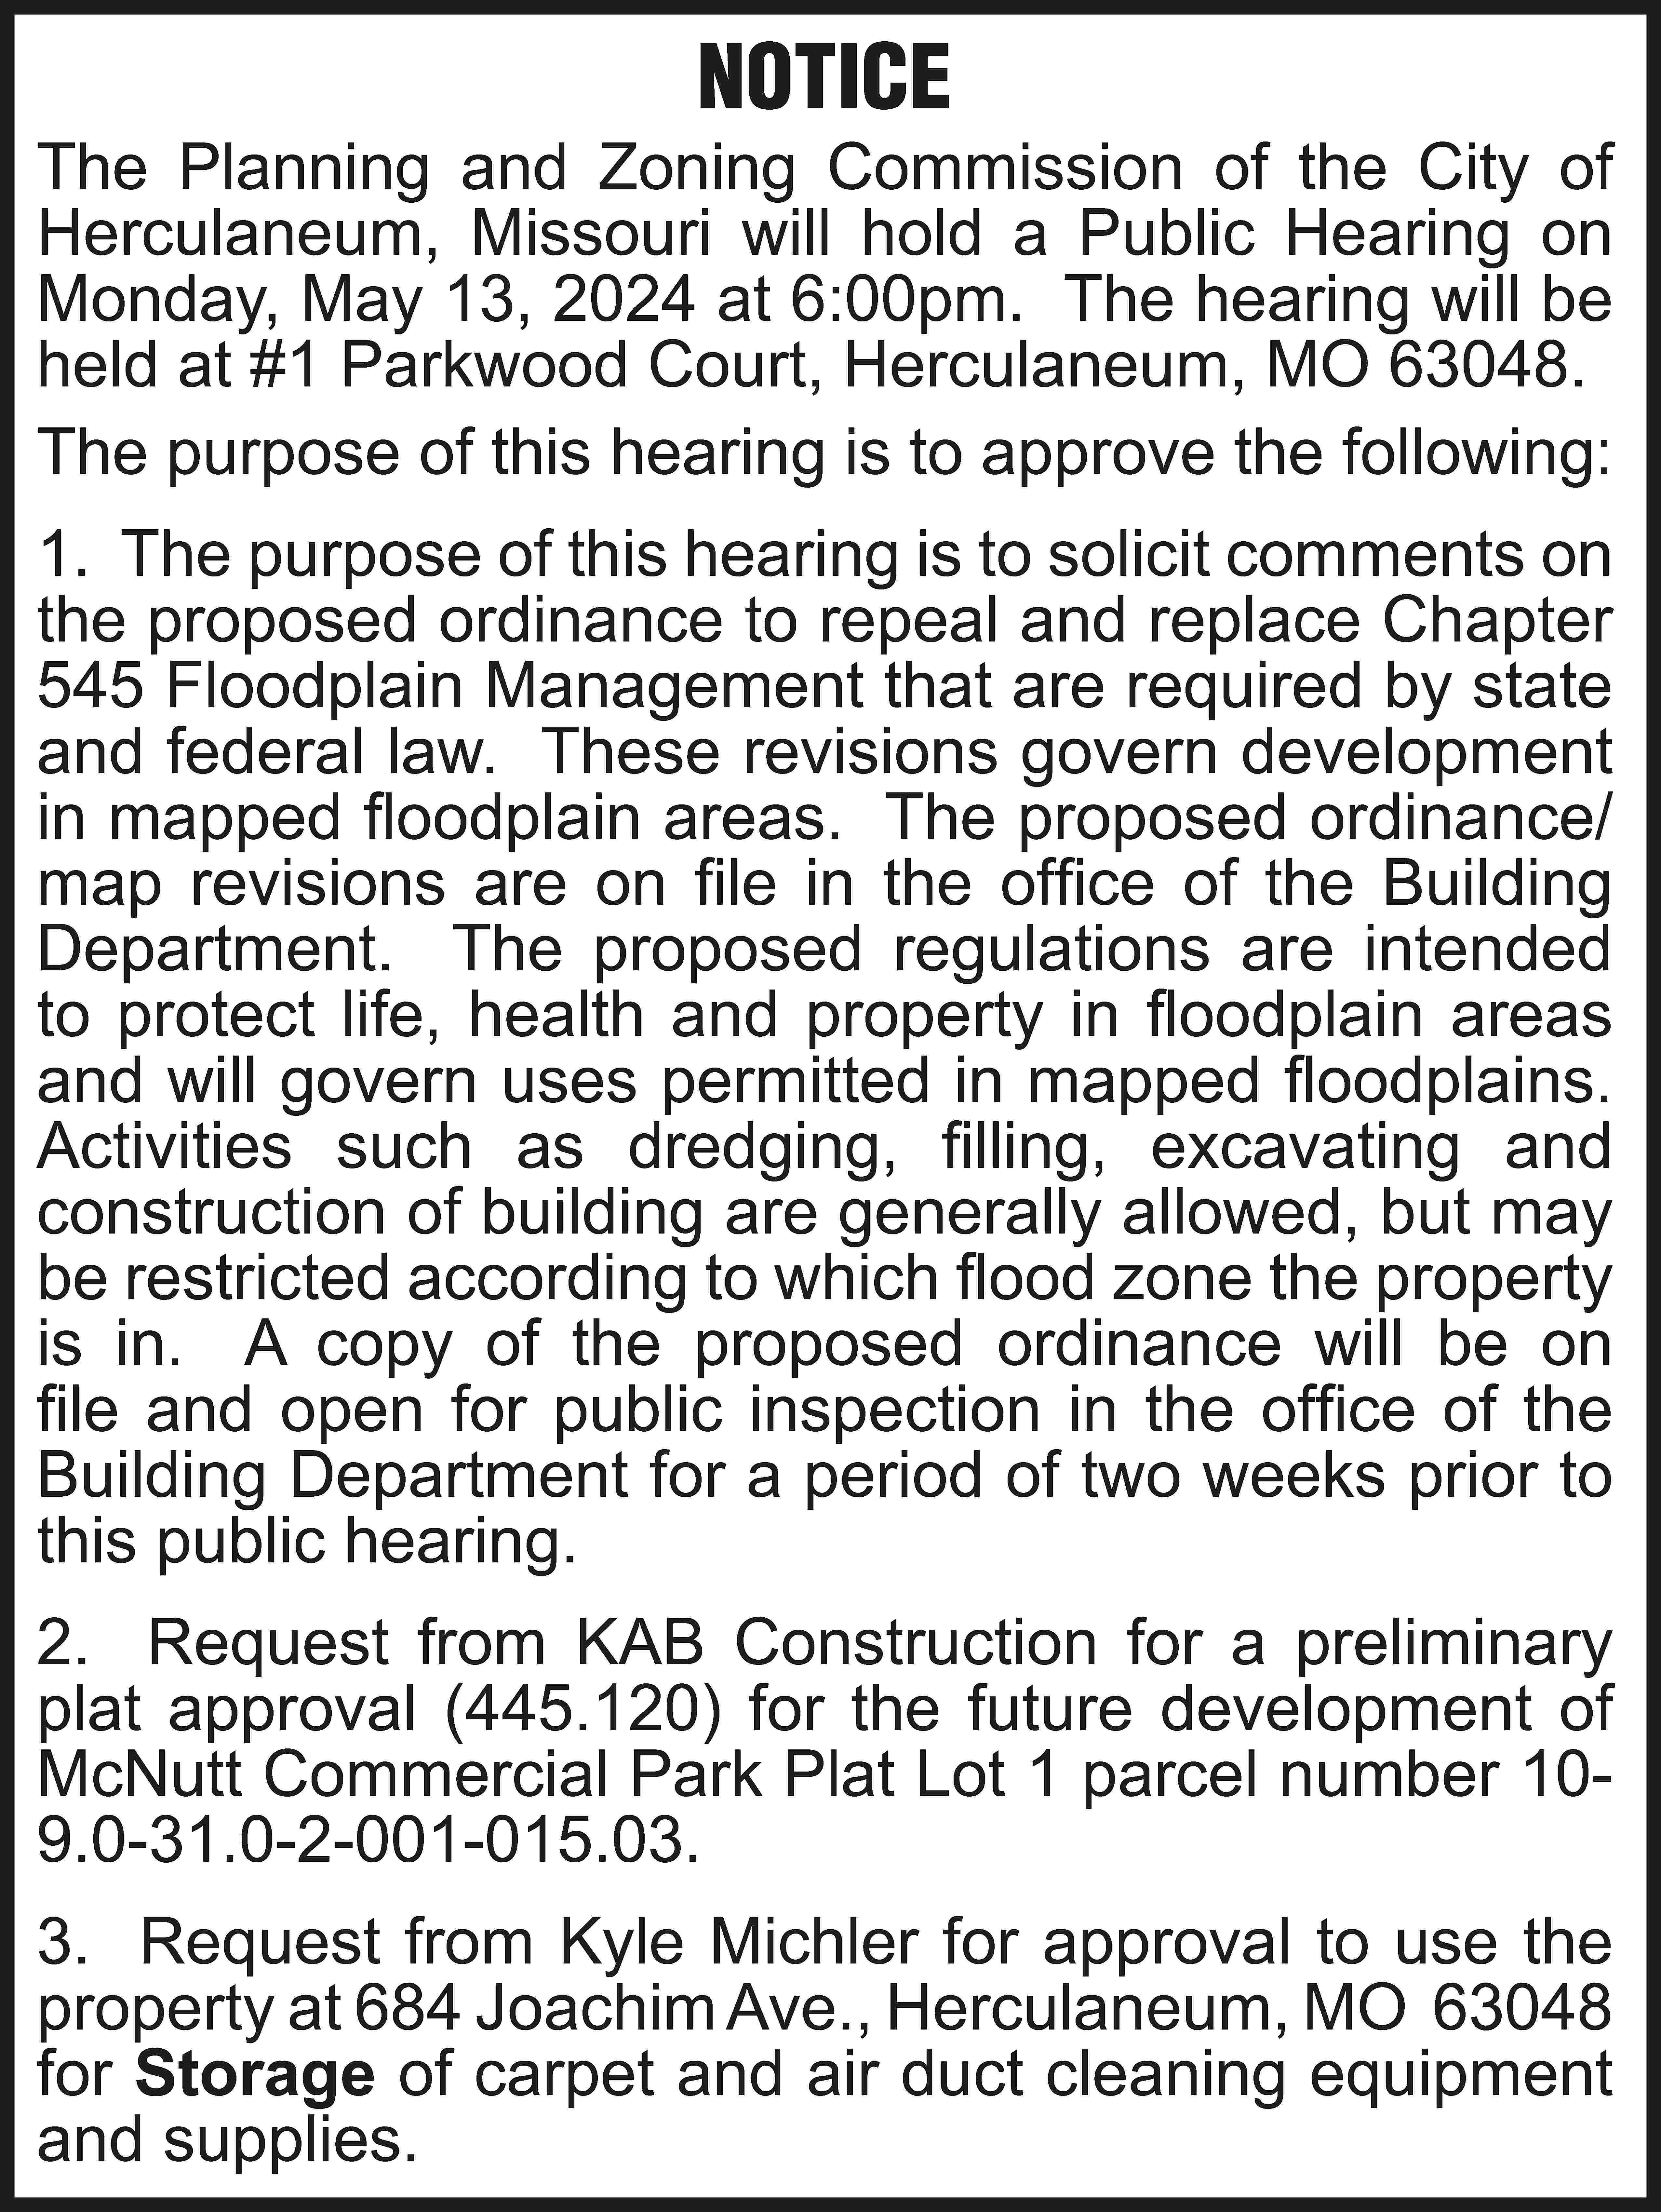 NOTICE The Planning and Zoning  NOTICE The Planning and Zoning Commission of the City of Herculaneum, Missouri will hold a Public Hearing on Monday, May 13, 2024 at 6:00pm. The hearing will be held at #1 Parkwood Court, Herculaneum, MO 63048. The purpose of this hearing is to approve the following: 1. The purpose of this hearing is to solicit comments on the proposed ordinance to repeal and replace Chapter 545 Floodplain Management that are required by state and federal law. These revisions govern development in mapped floodplain areas. The proposed ordinance/ map revisions are on file in the office of the Building Department. The proposed regulations are intended to protect life, health and property in floodplain areas and will govern uses permitted in mapped floodplains. Activities such as dredging, filling, excavating and construction of building are generally allowed, but may be restricted according to which flood zone the property is in. A copy of the proposed ordinance will be on file and open for public inspection in the office of the Building Department for a period of two weeks prior to this public hearing. 2. Request from KAB Construction for a preliminary plat approval (445.120) for the future development of McNutt Commercial Park Plat Lot 1 parcel number 109.0-31.0-2-001-015.03. 3. Request from Kyle Michler for approval to use the property at 684 Joachim Ave., Herculaneum, MO 63048 for Storage of carpet and air duct cleaning equipment and supplies.